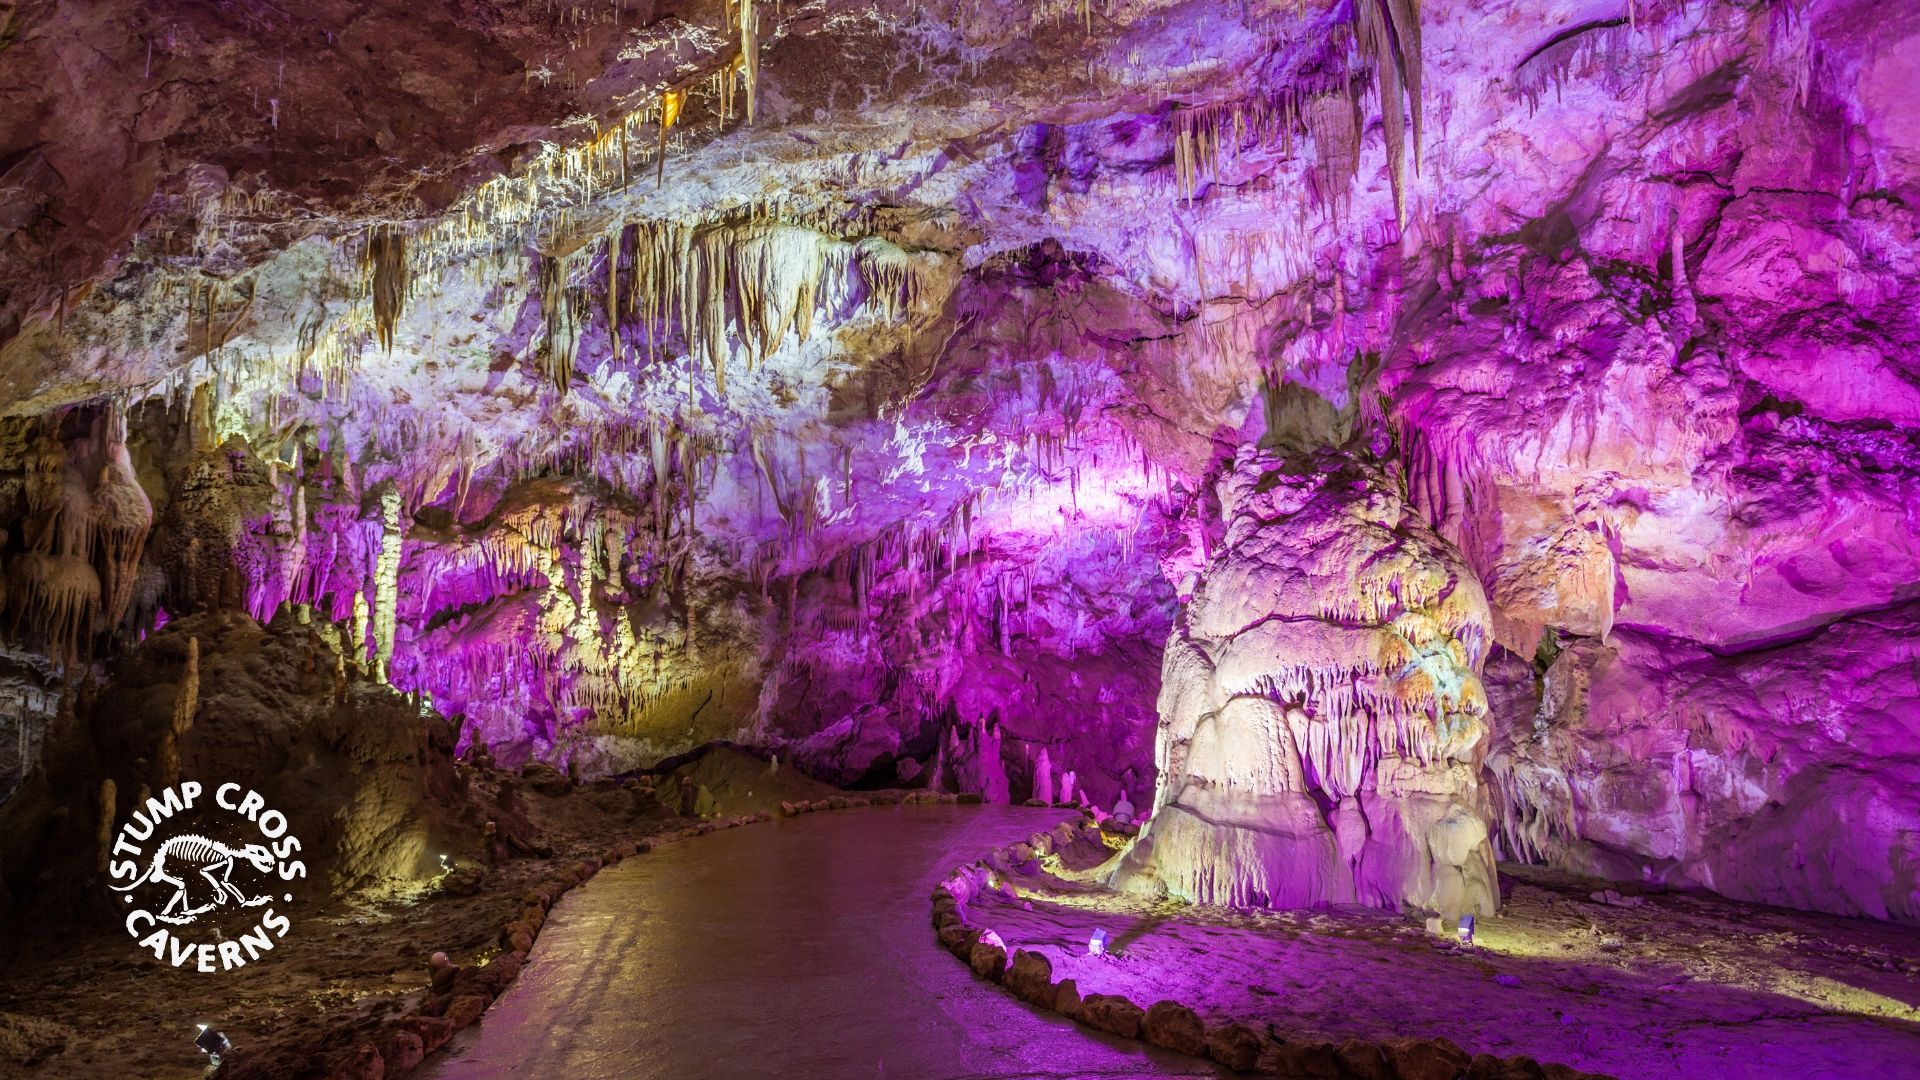 Stump Cross Caverns is home to a variety of cave formations. Learn how these formations are created and about the geological history of the caves.
